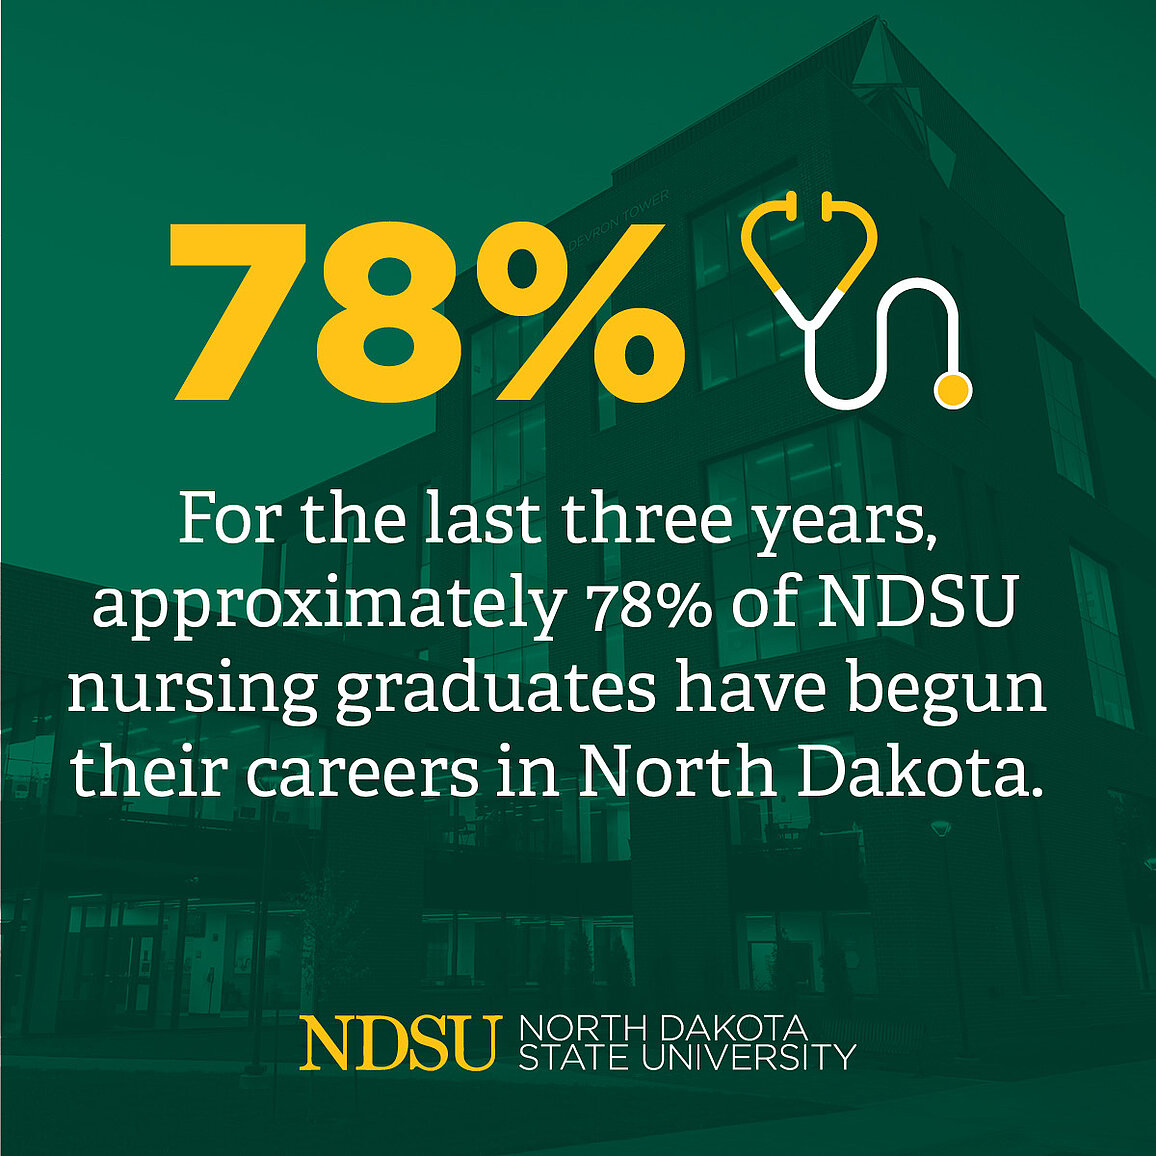 Image 78 percent of nursing grads stay in ND